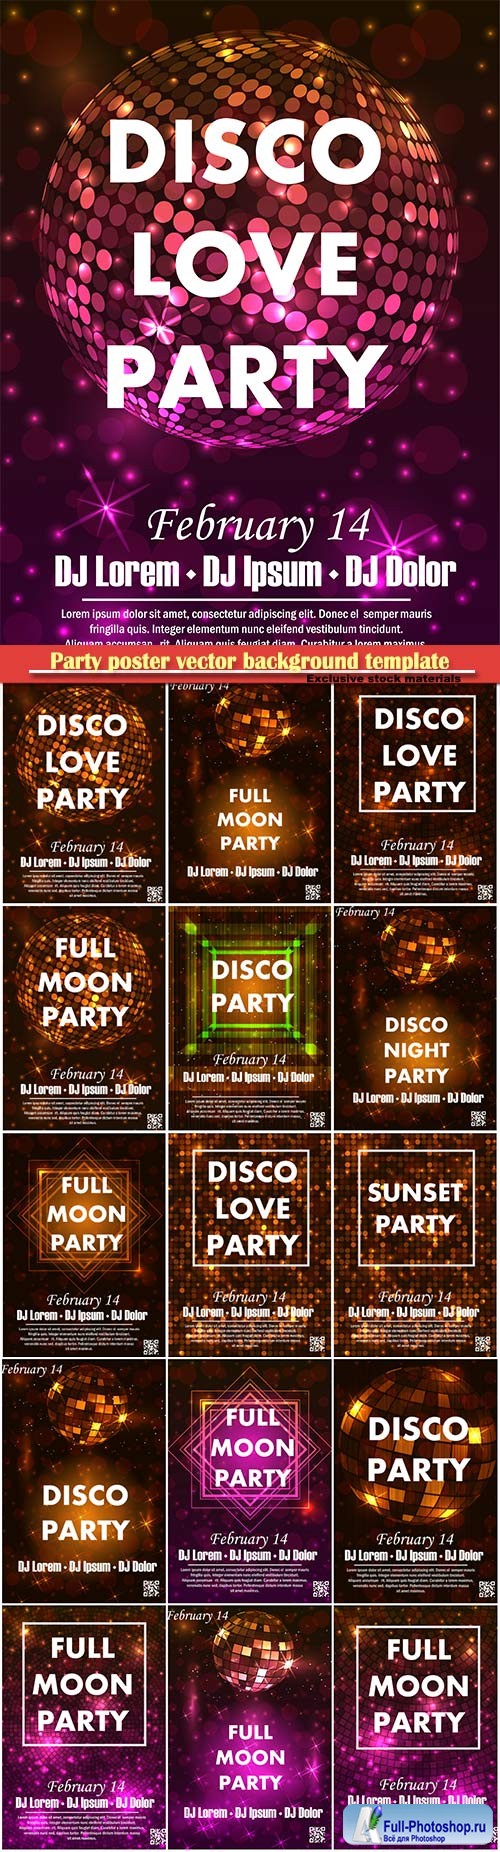 Party poster vector background template with particles and modern geometric shapes